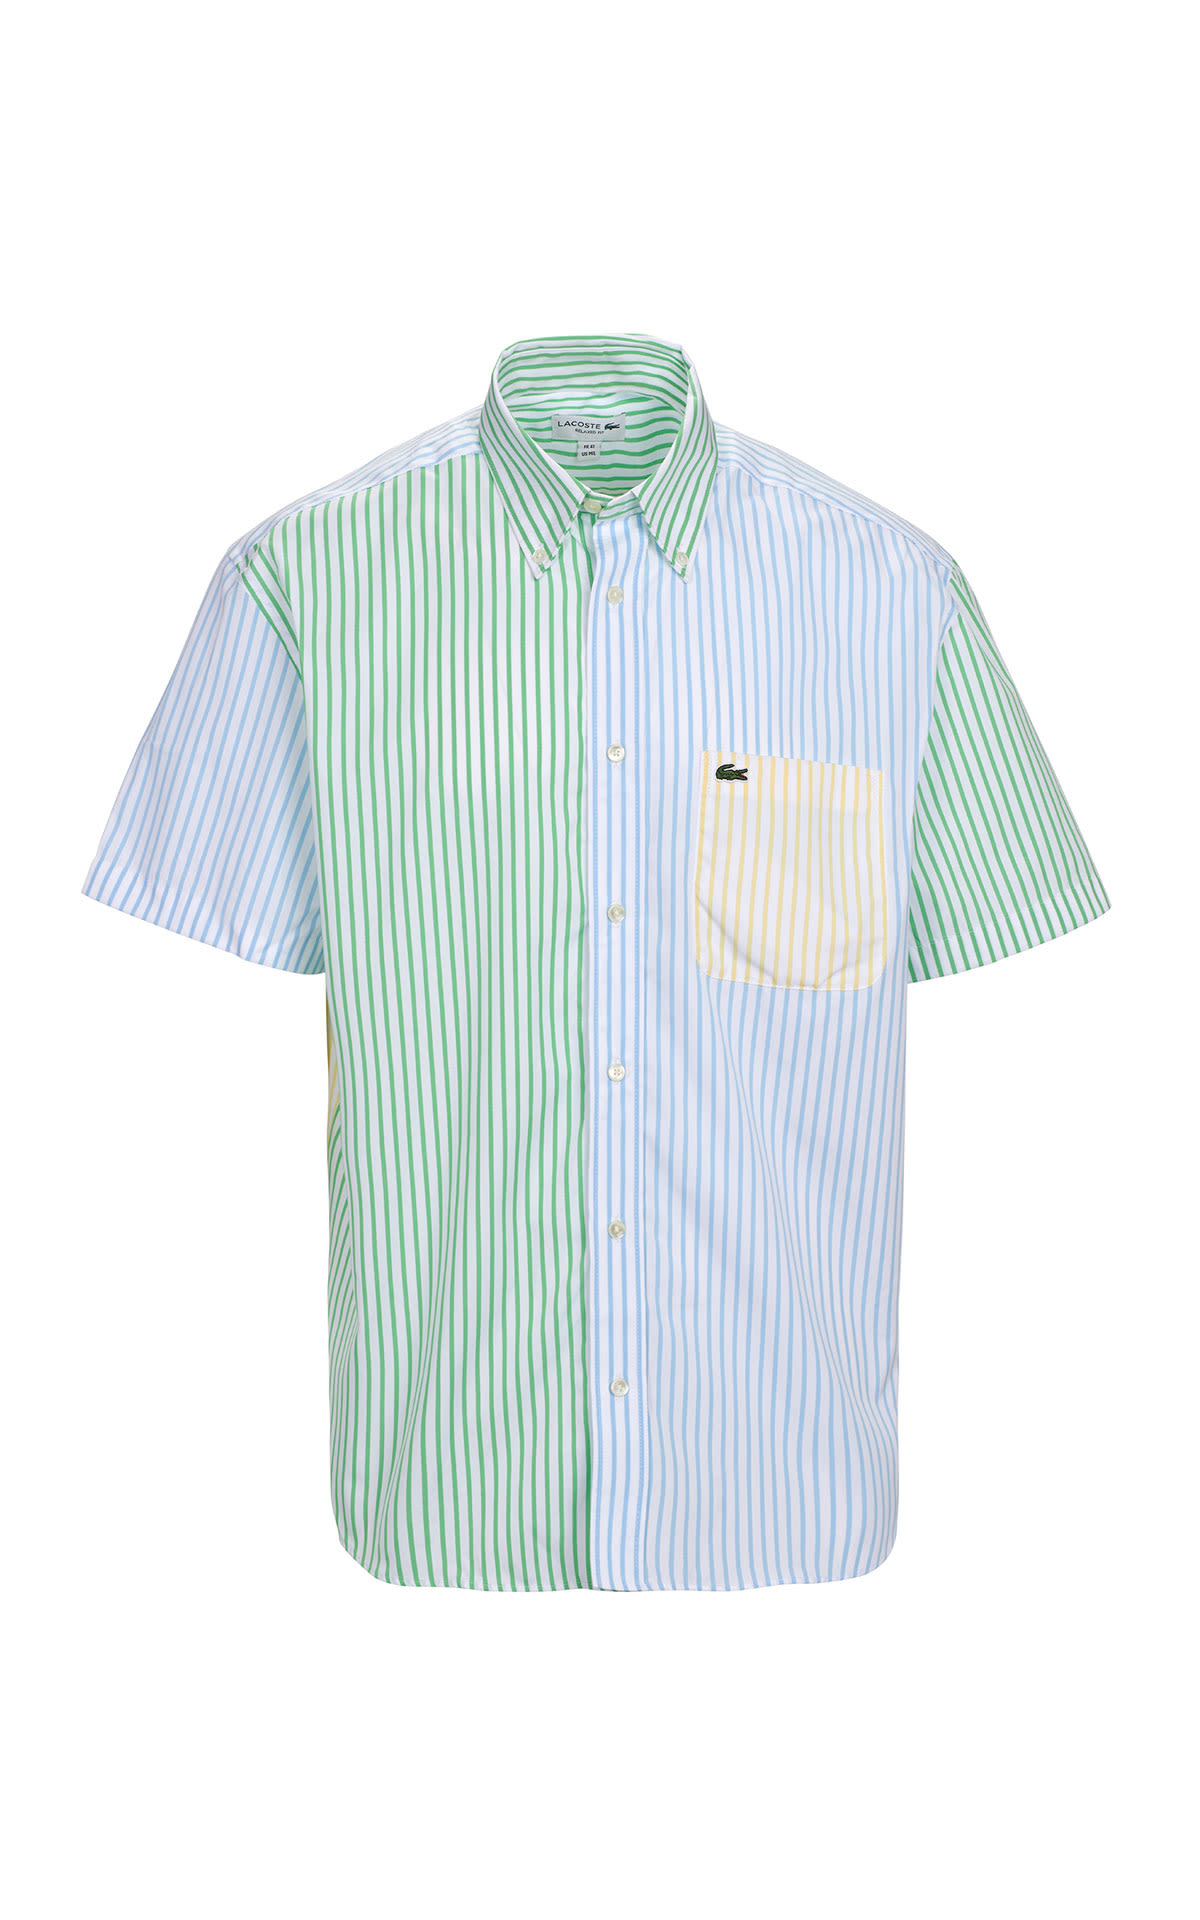 Two-tone striped shirt Lacoste